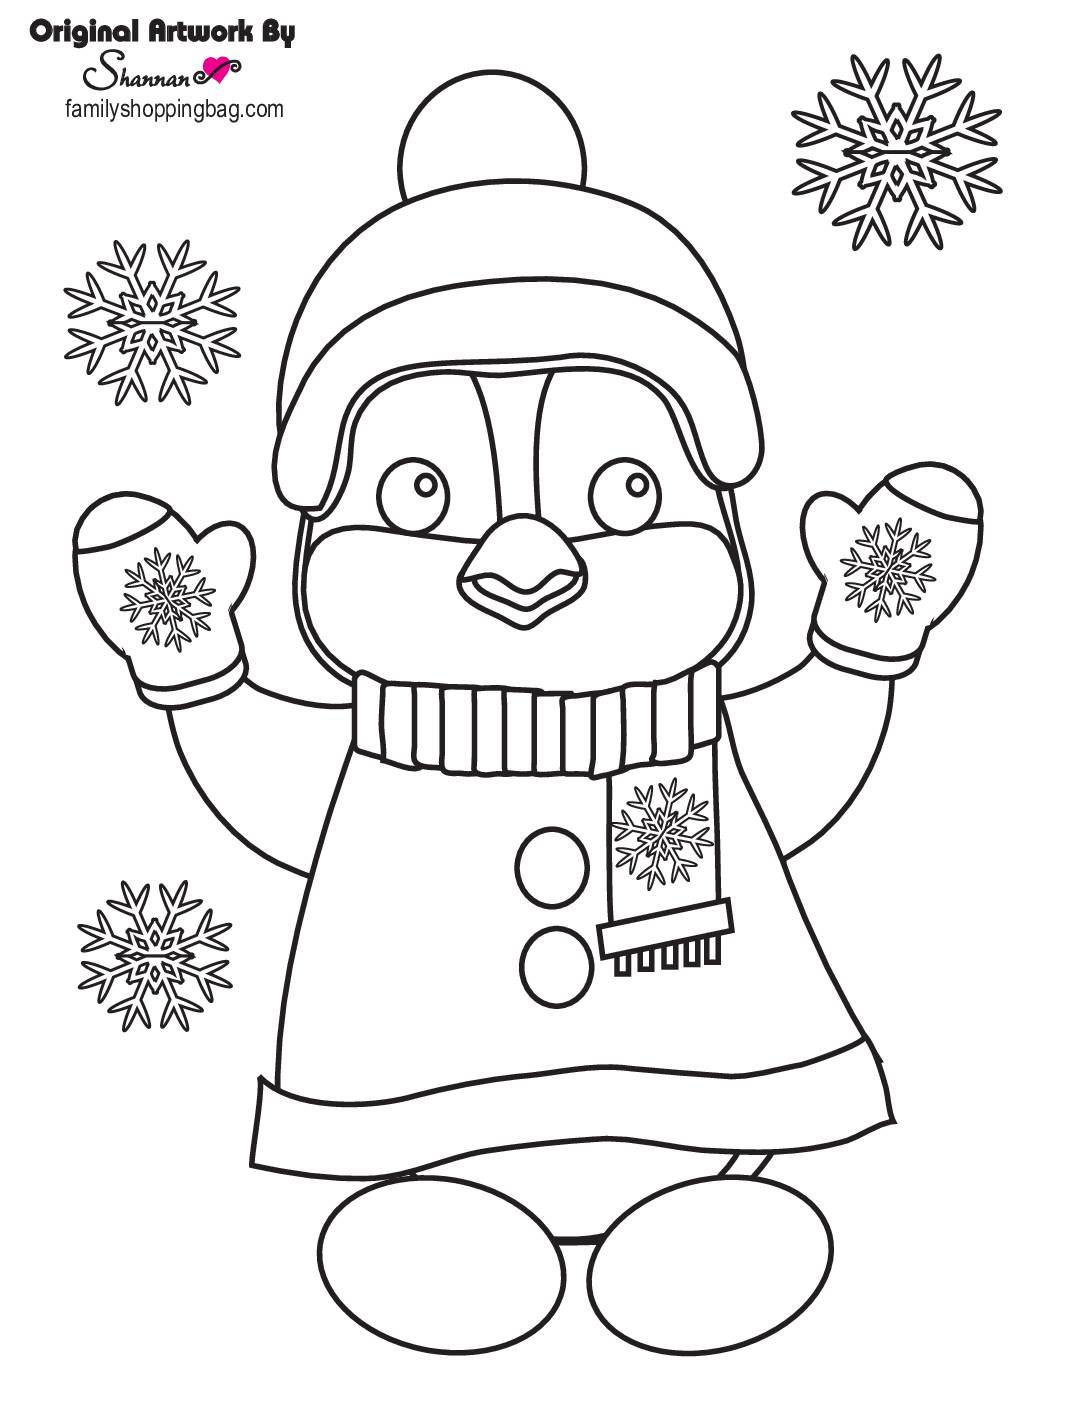 Coloring Page5